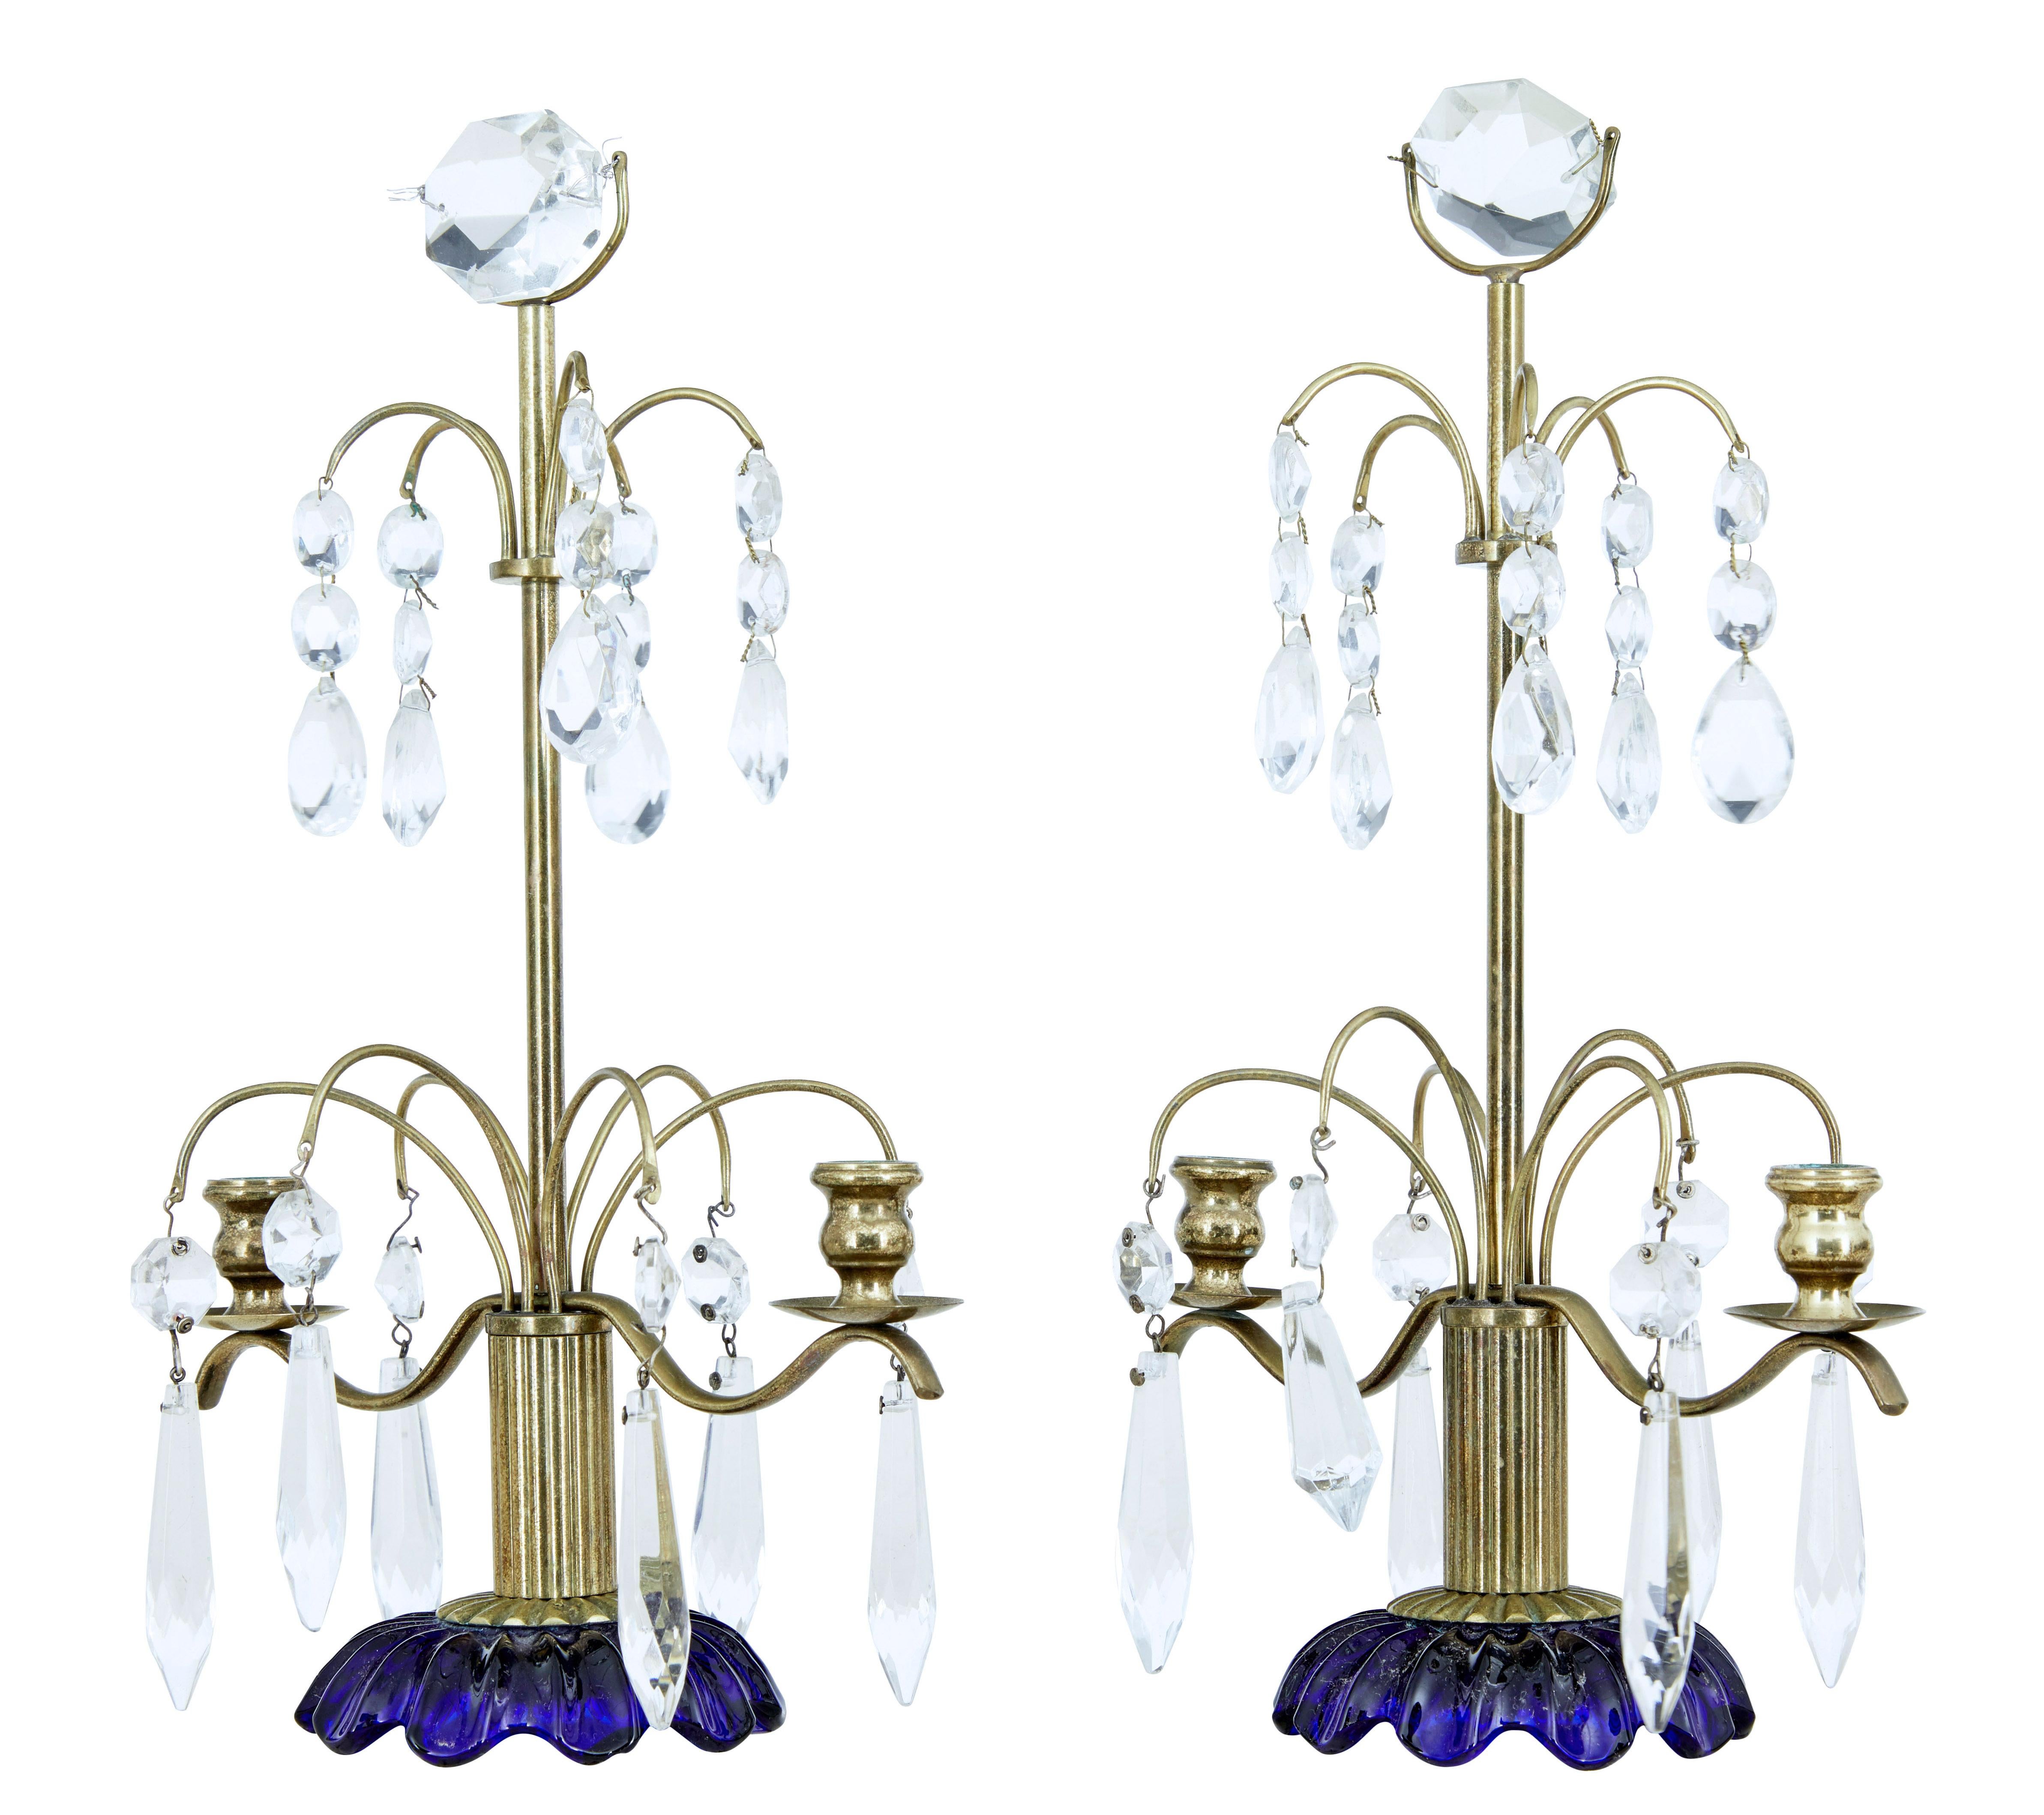 Pair of good quality cut glass candelabra circa 1960.

Brass frame with fluted column which links to the cobalt blue shaped base. Twin brass holders for small candles. Adorned with cut glass droplets.

1 replaced droplet which is smaller than